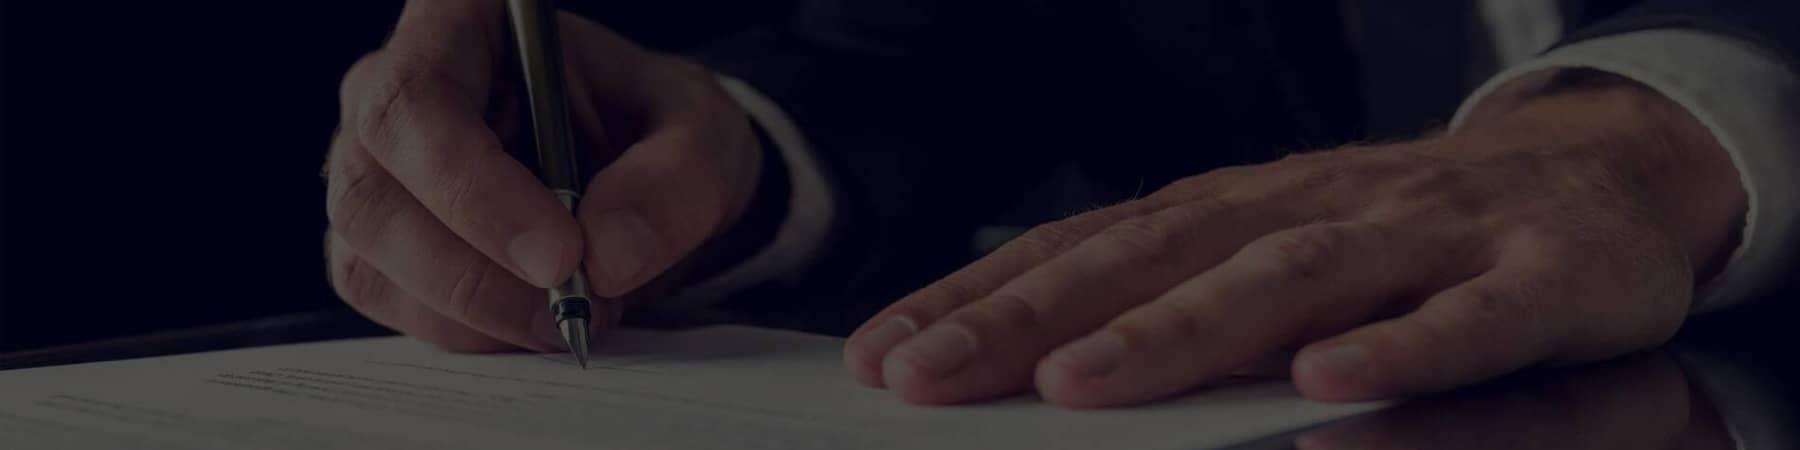 Hands of Man in Suit Signing Document